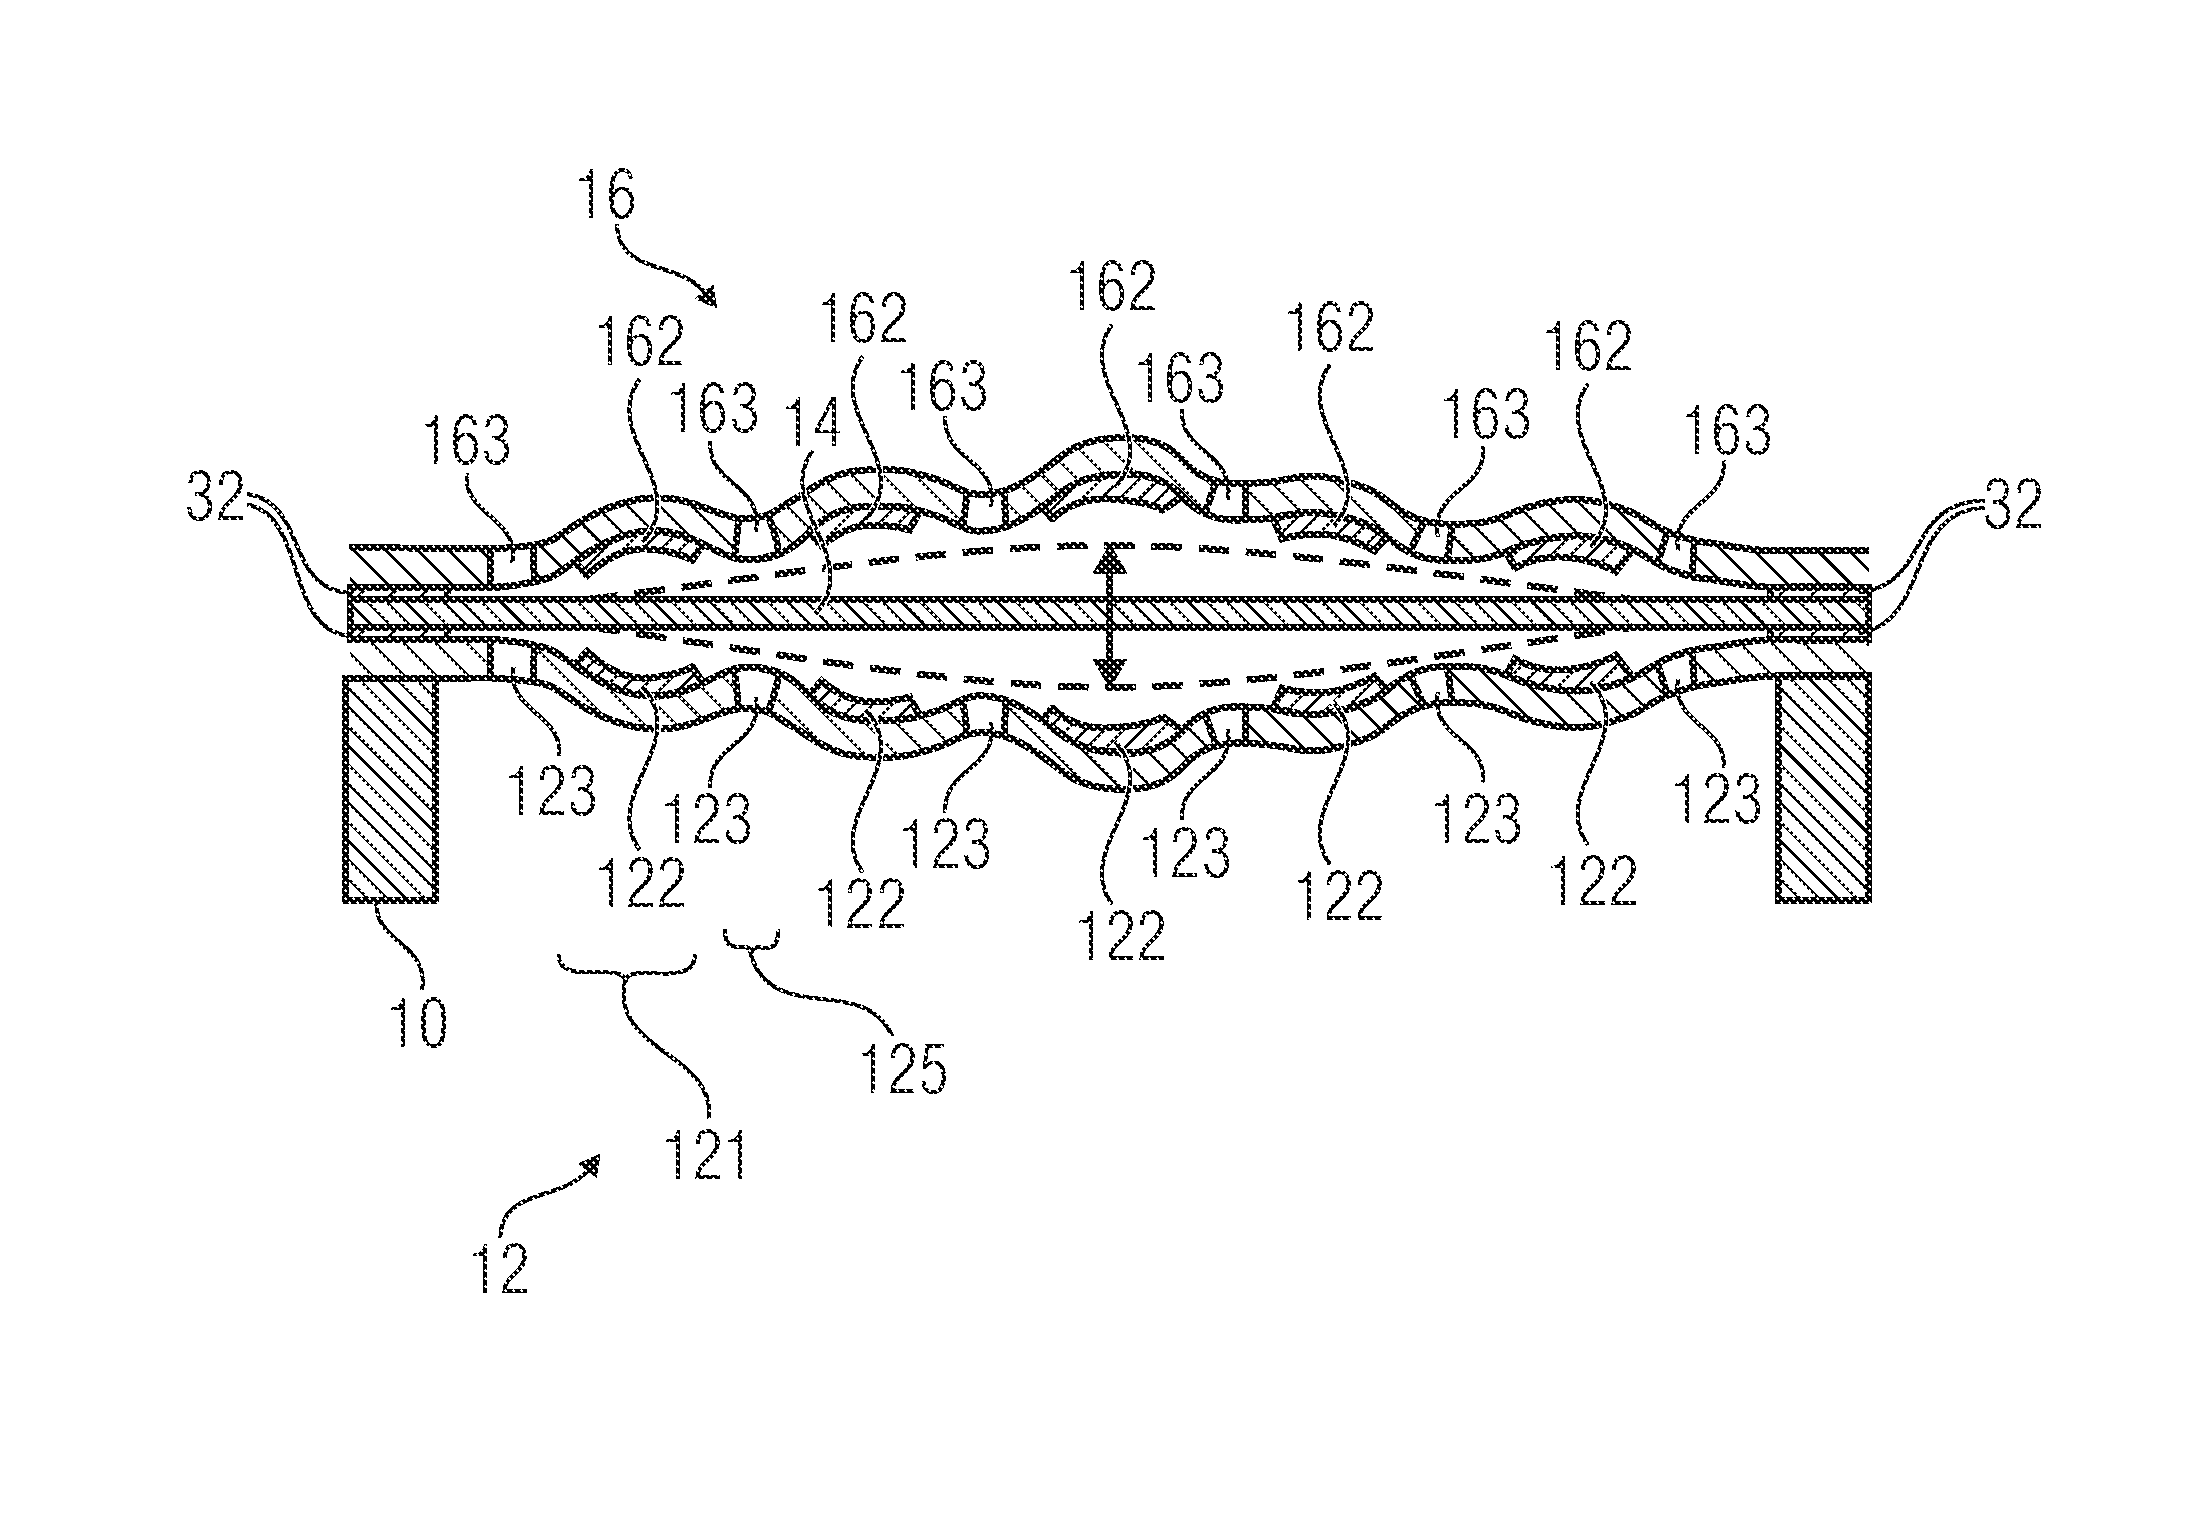 Micro electrical mechanical system with bending deflection of backplate structure